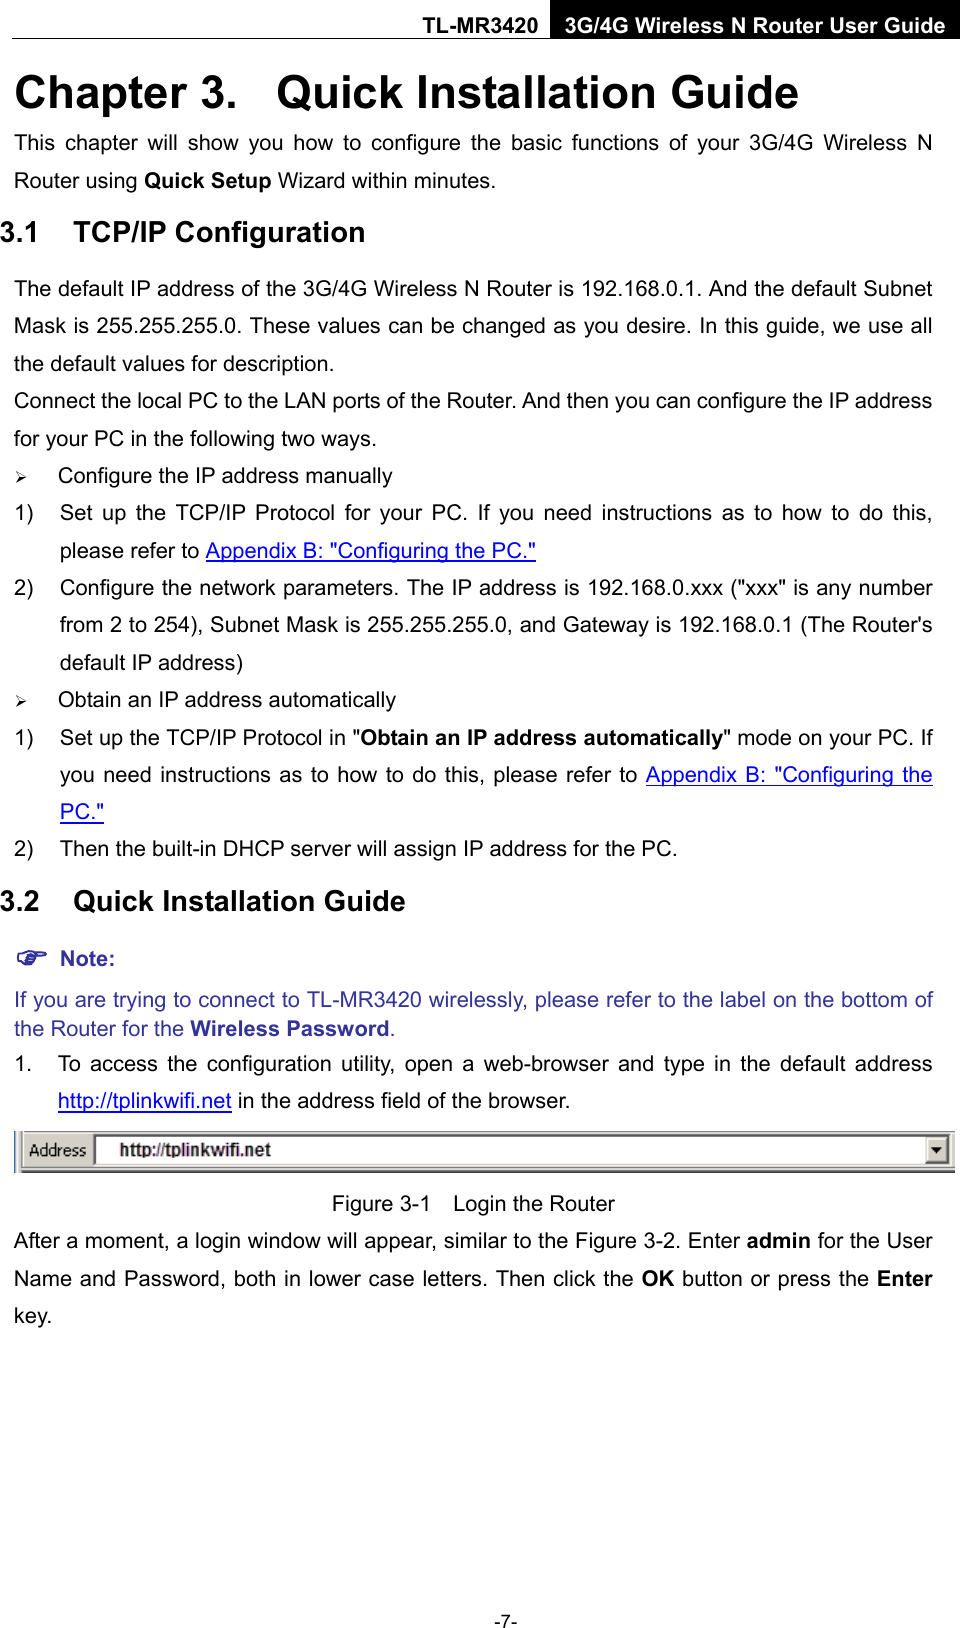    -7- TL-MR3420 3G/4G Wireless N Router User Guide Chapter 3.  Quick Installation Guide This chapter will show you how to configure the basic functions of your 3G/4G  Wireless  N Router using Quick Setup Wizard within minutes. 3.1 TCP/IP Configuration The default IP address of the 3G/4G Wireless N Router is 192.168.0.1. And the default Subnet Mask is 255.255.255.0. These values can be changed as you desire. In this guide, we use all the default values for description. Connect the local PC to the LAN ports of the Router. And then you can configure the IP address for your PC in the following two ways.  Configure the IP address manually 1) Set up the TCP/IP Protocol for your PC. If you need instructions as to how to do this, please refer to Appendix B: &quot;Configuring the PC.&quot; 2) Configure the network parameters. The IP address is 192.168.0.xxx (&quot;xxx&quot; is any number from 2 to 254), Subnet Mask is 255.255.255.0, and Gateway is 192.168.0.1 (The Router&apos;s default IP address)  Obtain an IP address automatically 1) Set up the TCP/IP Protocol in &quot;Obtain an IP address automatically&quot; mode on your PC. If you need instructions as to how to do this, please refer to Appendix B: &quot;Configuring the PC.&quot; 2) Then the built-in DHCP server will assign IP address for the PC. 3.2 Quick Installation Guide  Note: If you are trying to connect to TL-MR3420 wirelessly, please refer to the label on the bottom of the Router for the Wireless Password. 1. To access the configuration utility, open a web-browser and  type in the default address http://tplinkwifi.net in the address field of the browser.  Figure 3-1  Login the Router After a moment, a login window will appear, similar to the Figure 3-2. Enter admin for the User Name and Password, both in lower case letters. Then click the OK button or press the Enter key. 